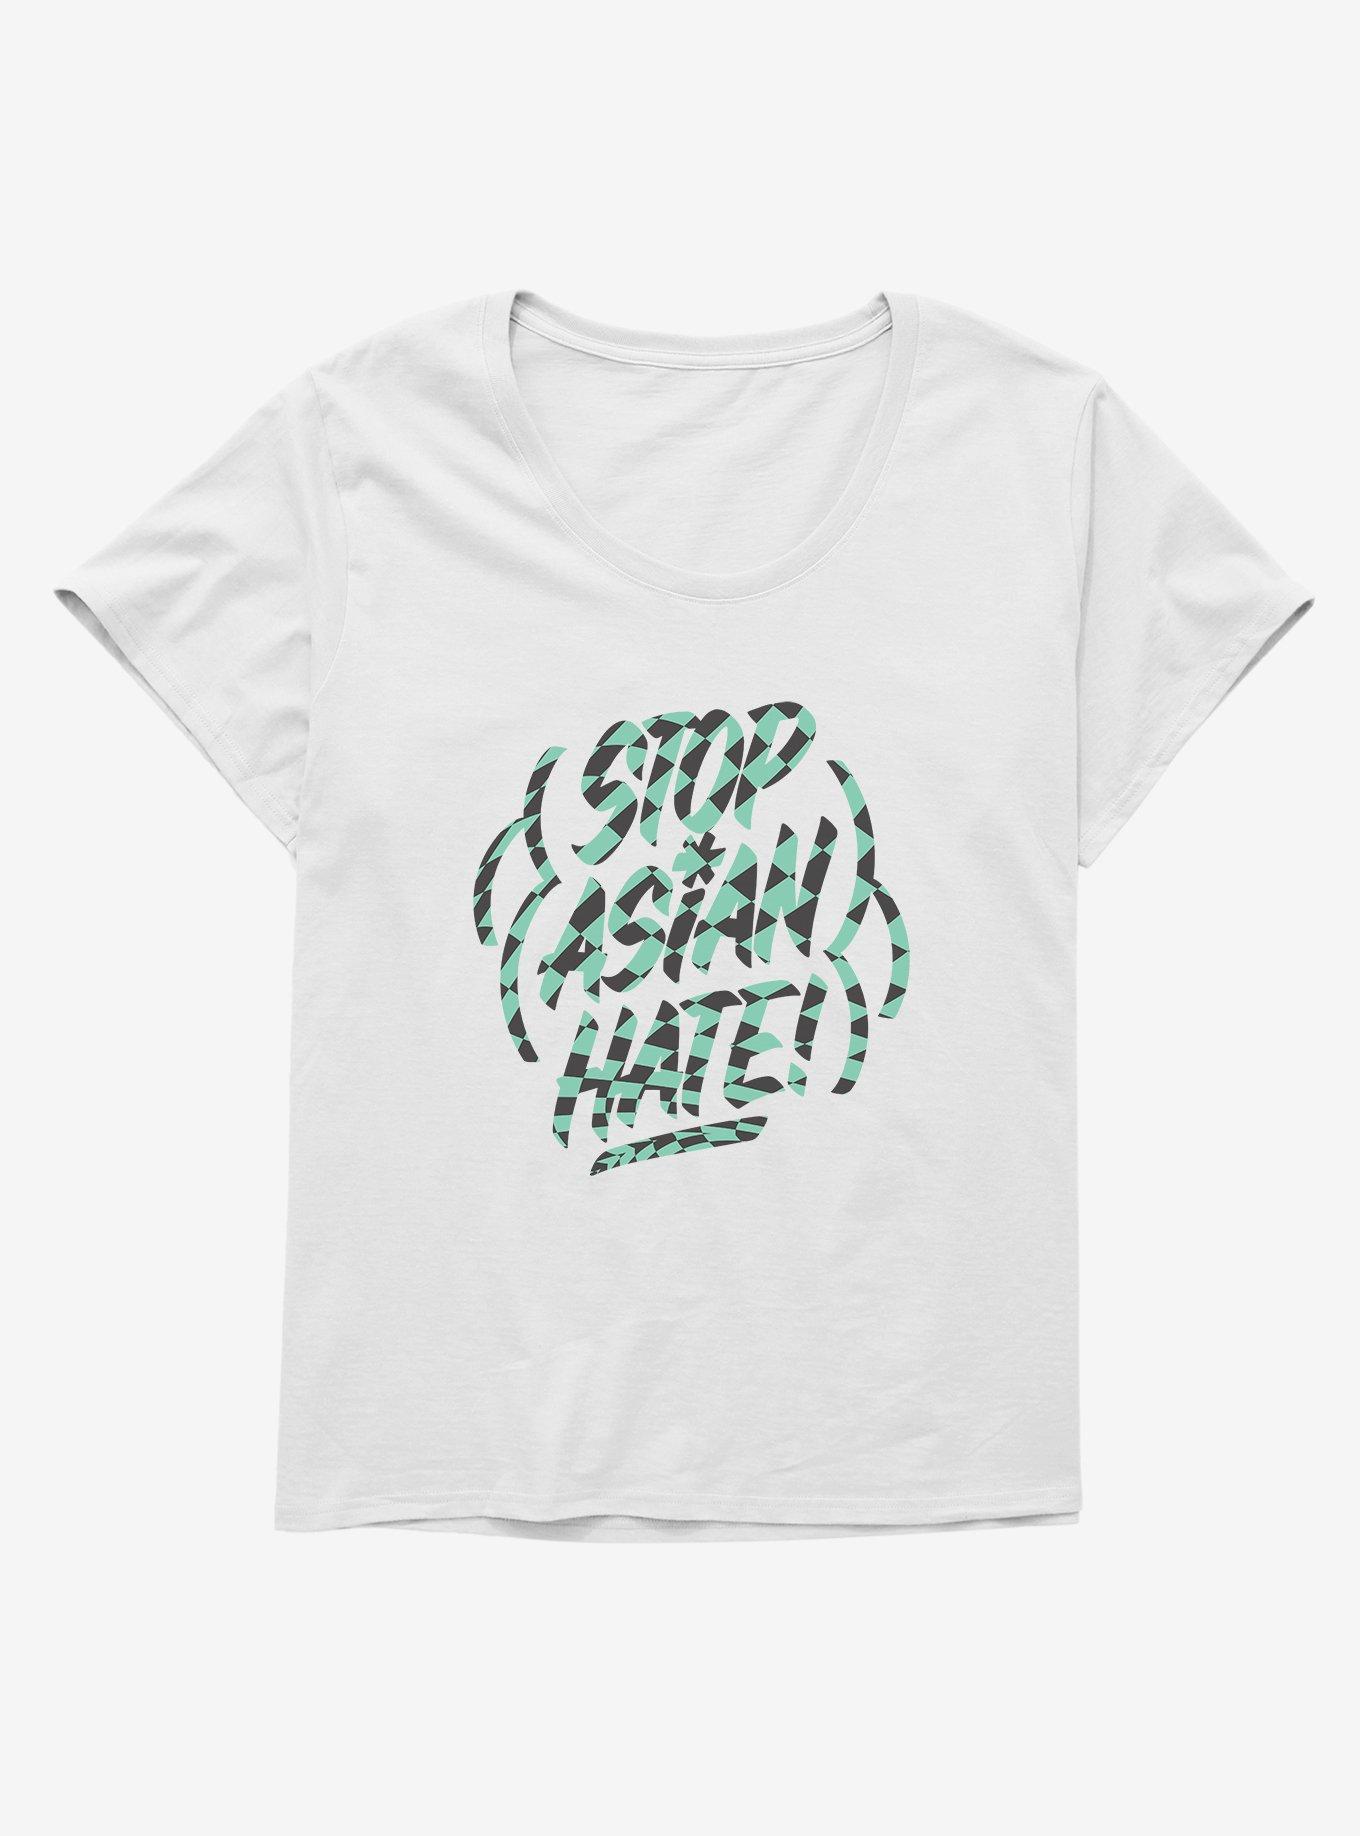 Checkered Stop Asian Hate Girls T-Shirt Plus Size, WHITE, hi-res